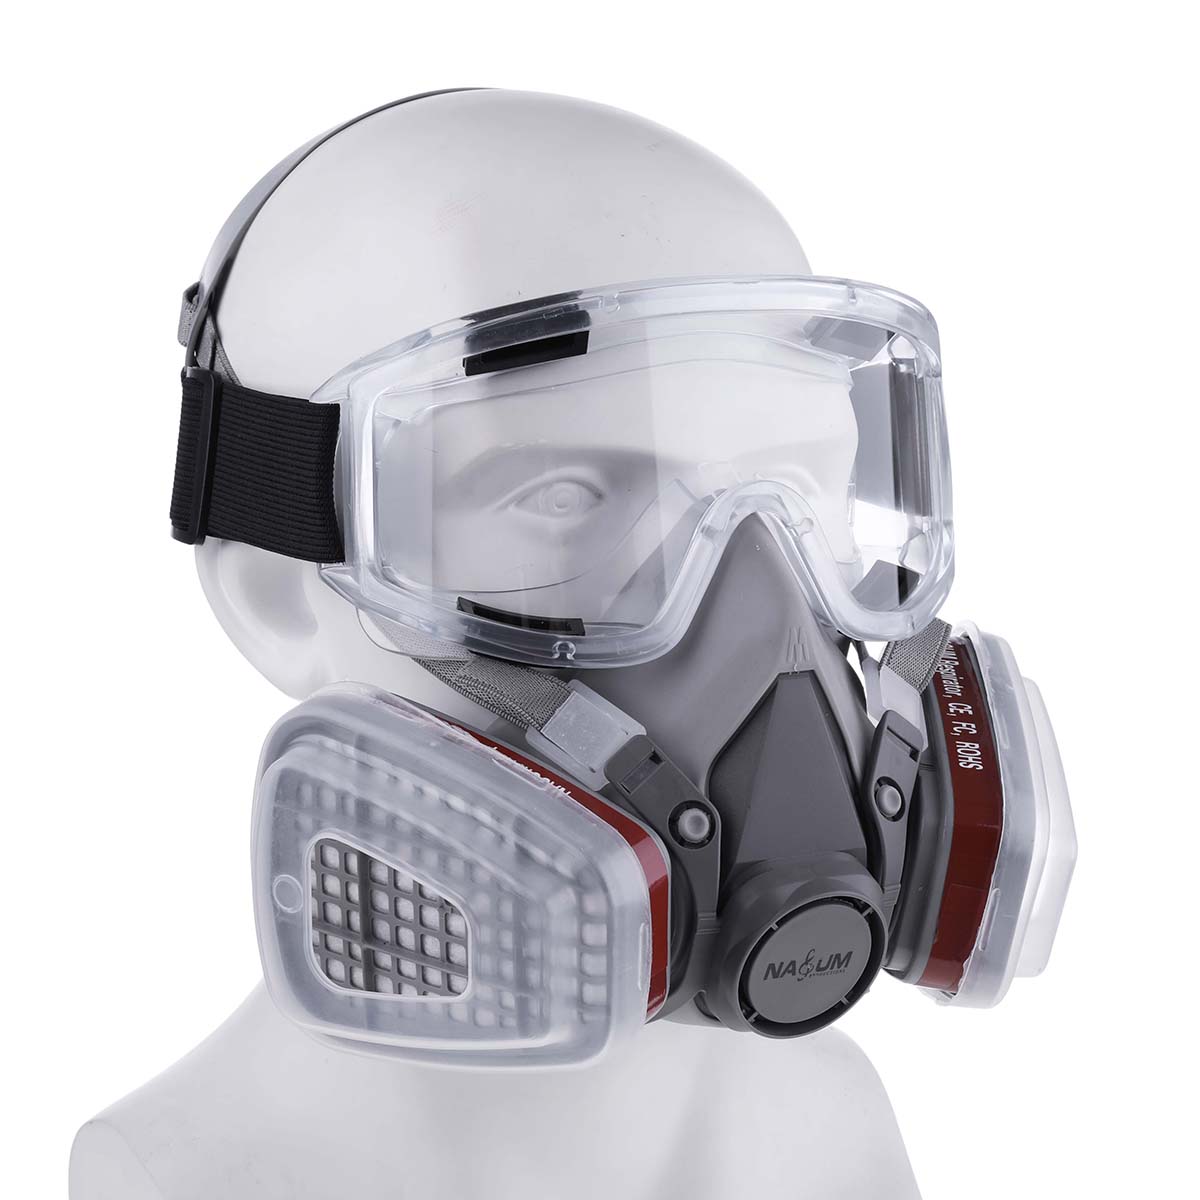 NASUM-Respirator-Mask-with-Protective-Goggles-for-Paint-Spray-Dust-Chemicals-Protection-Odour-Contro-1595188-10